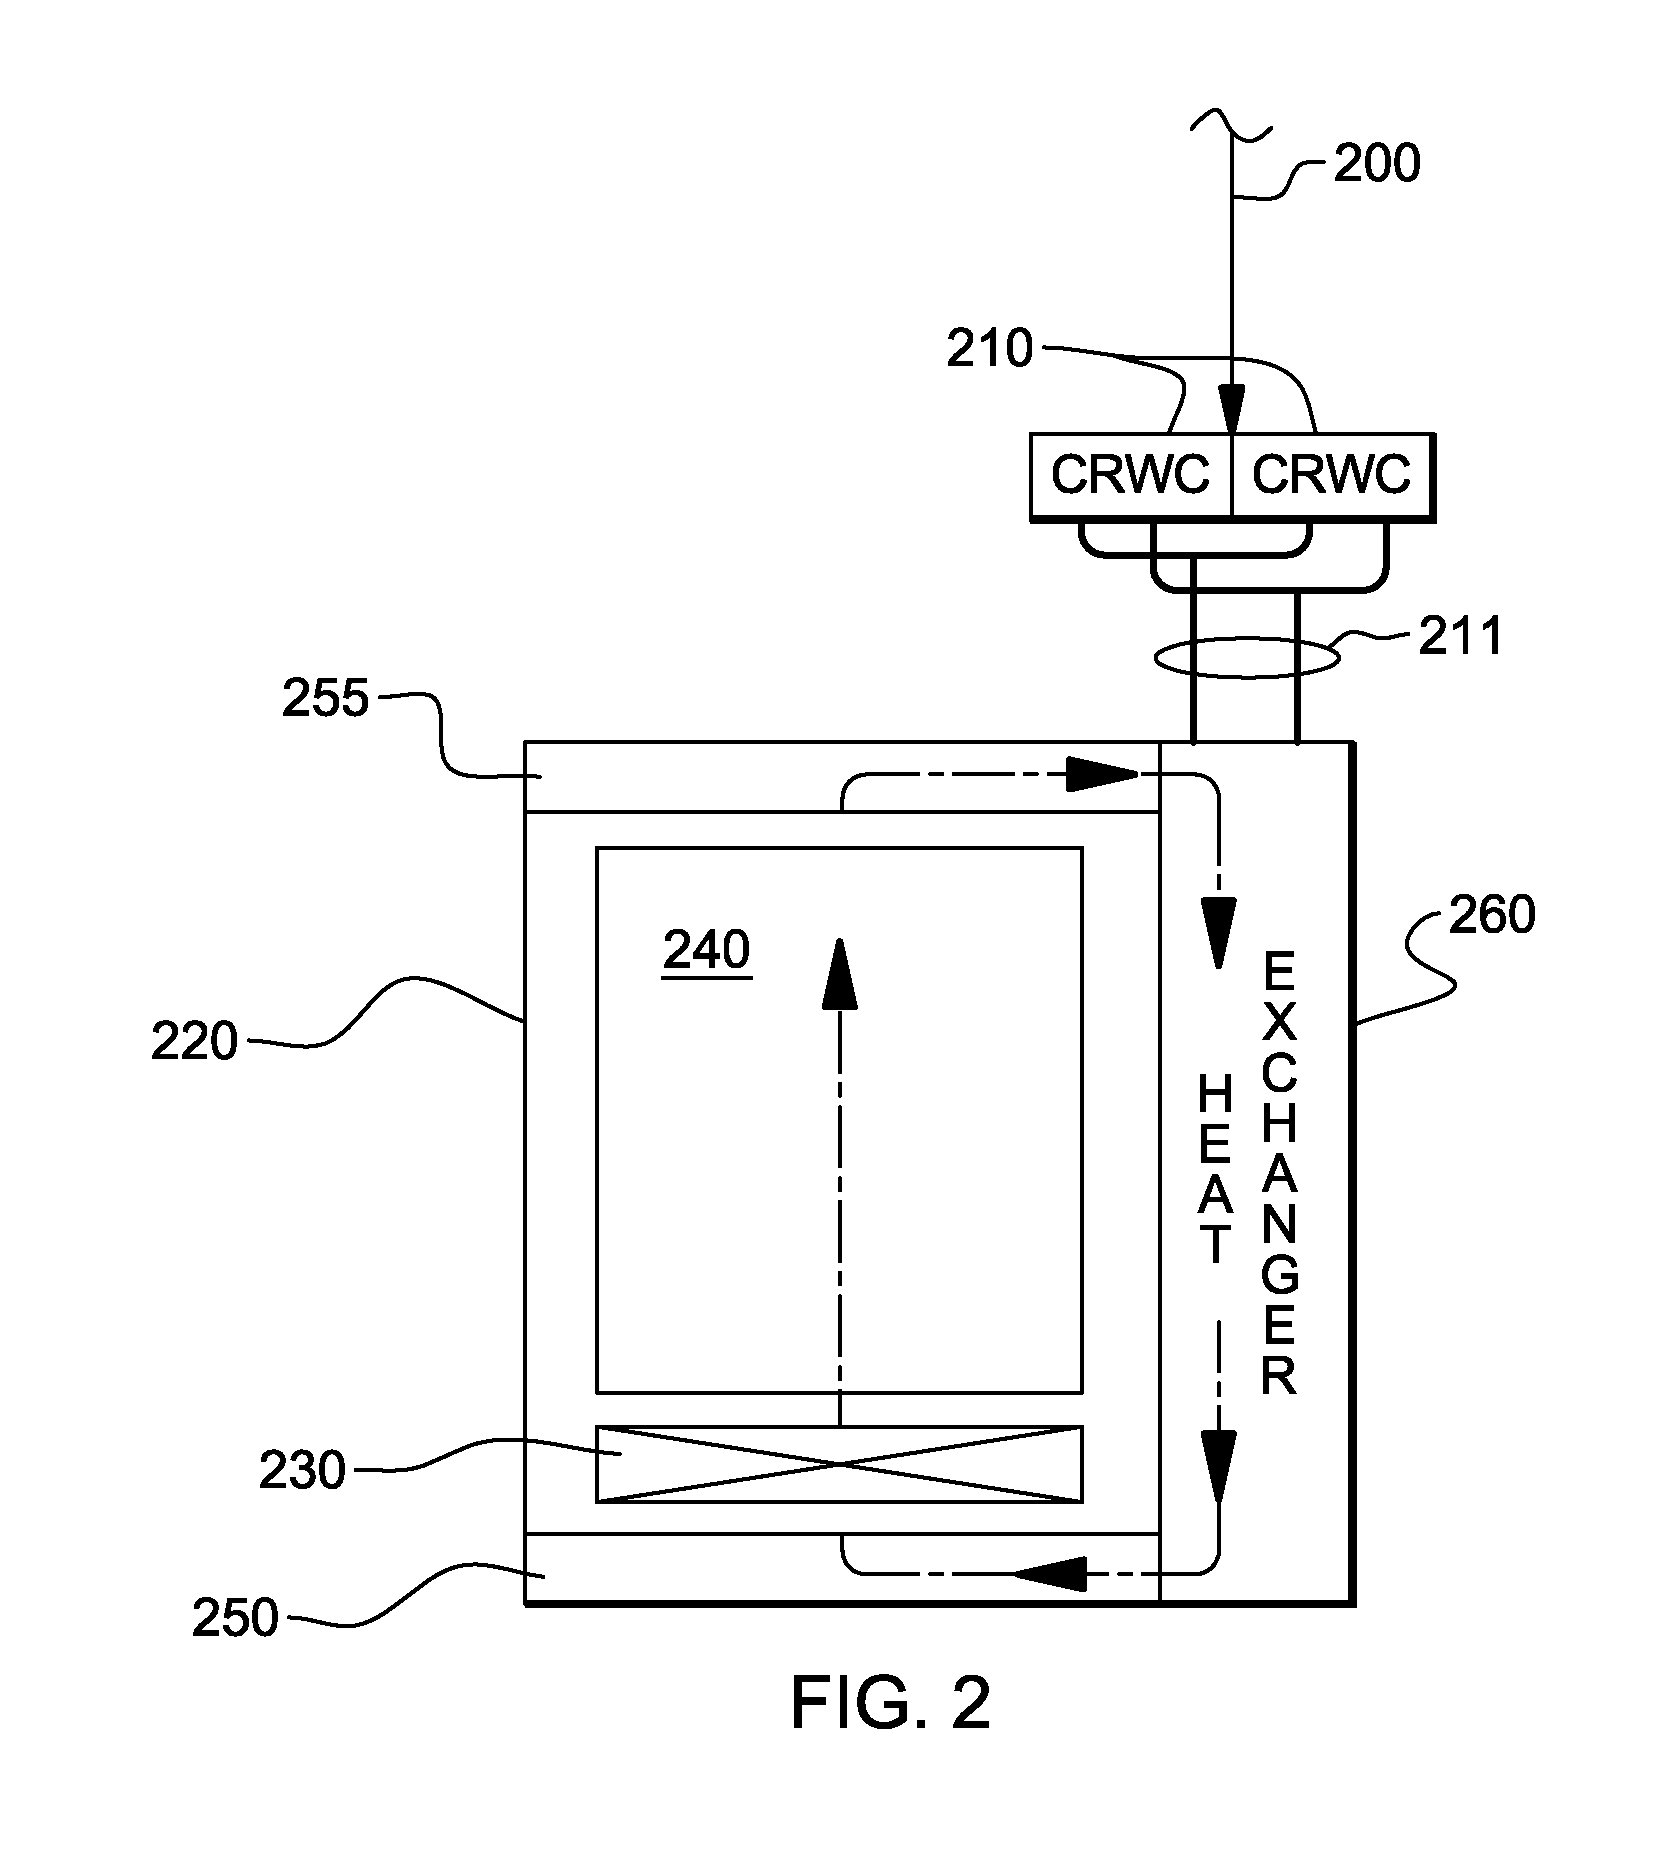 Cooled electronic system with liquid-cooled cold plate and thermal spreader coupled to electronic component